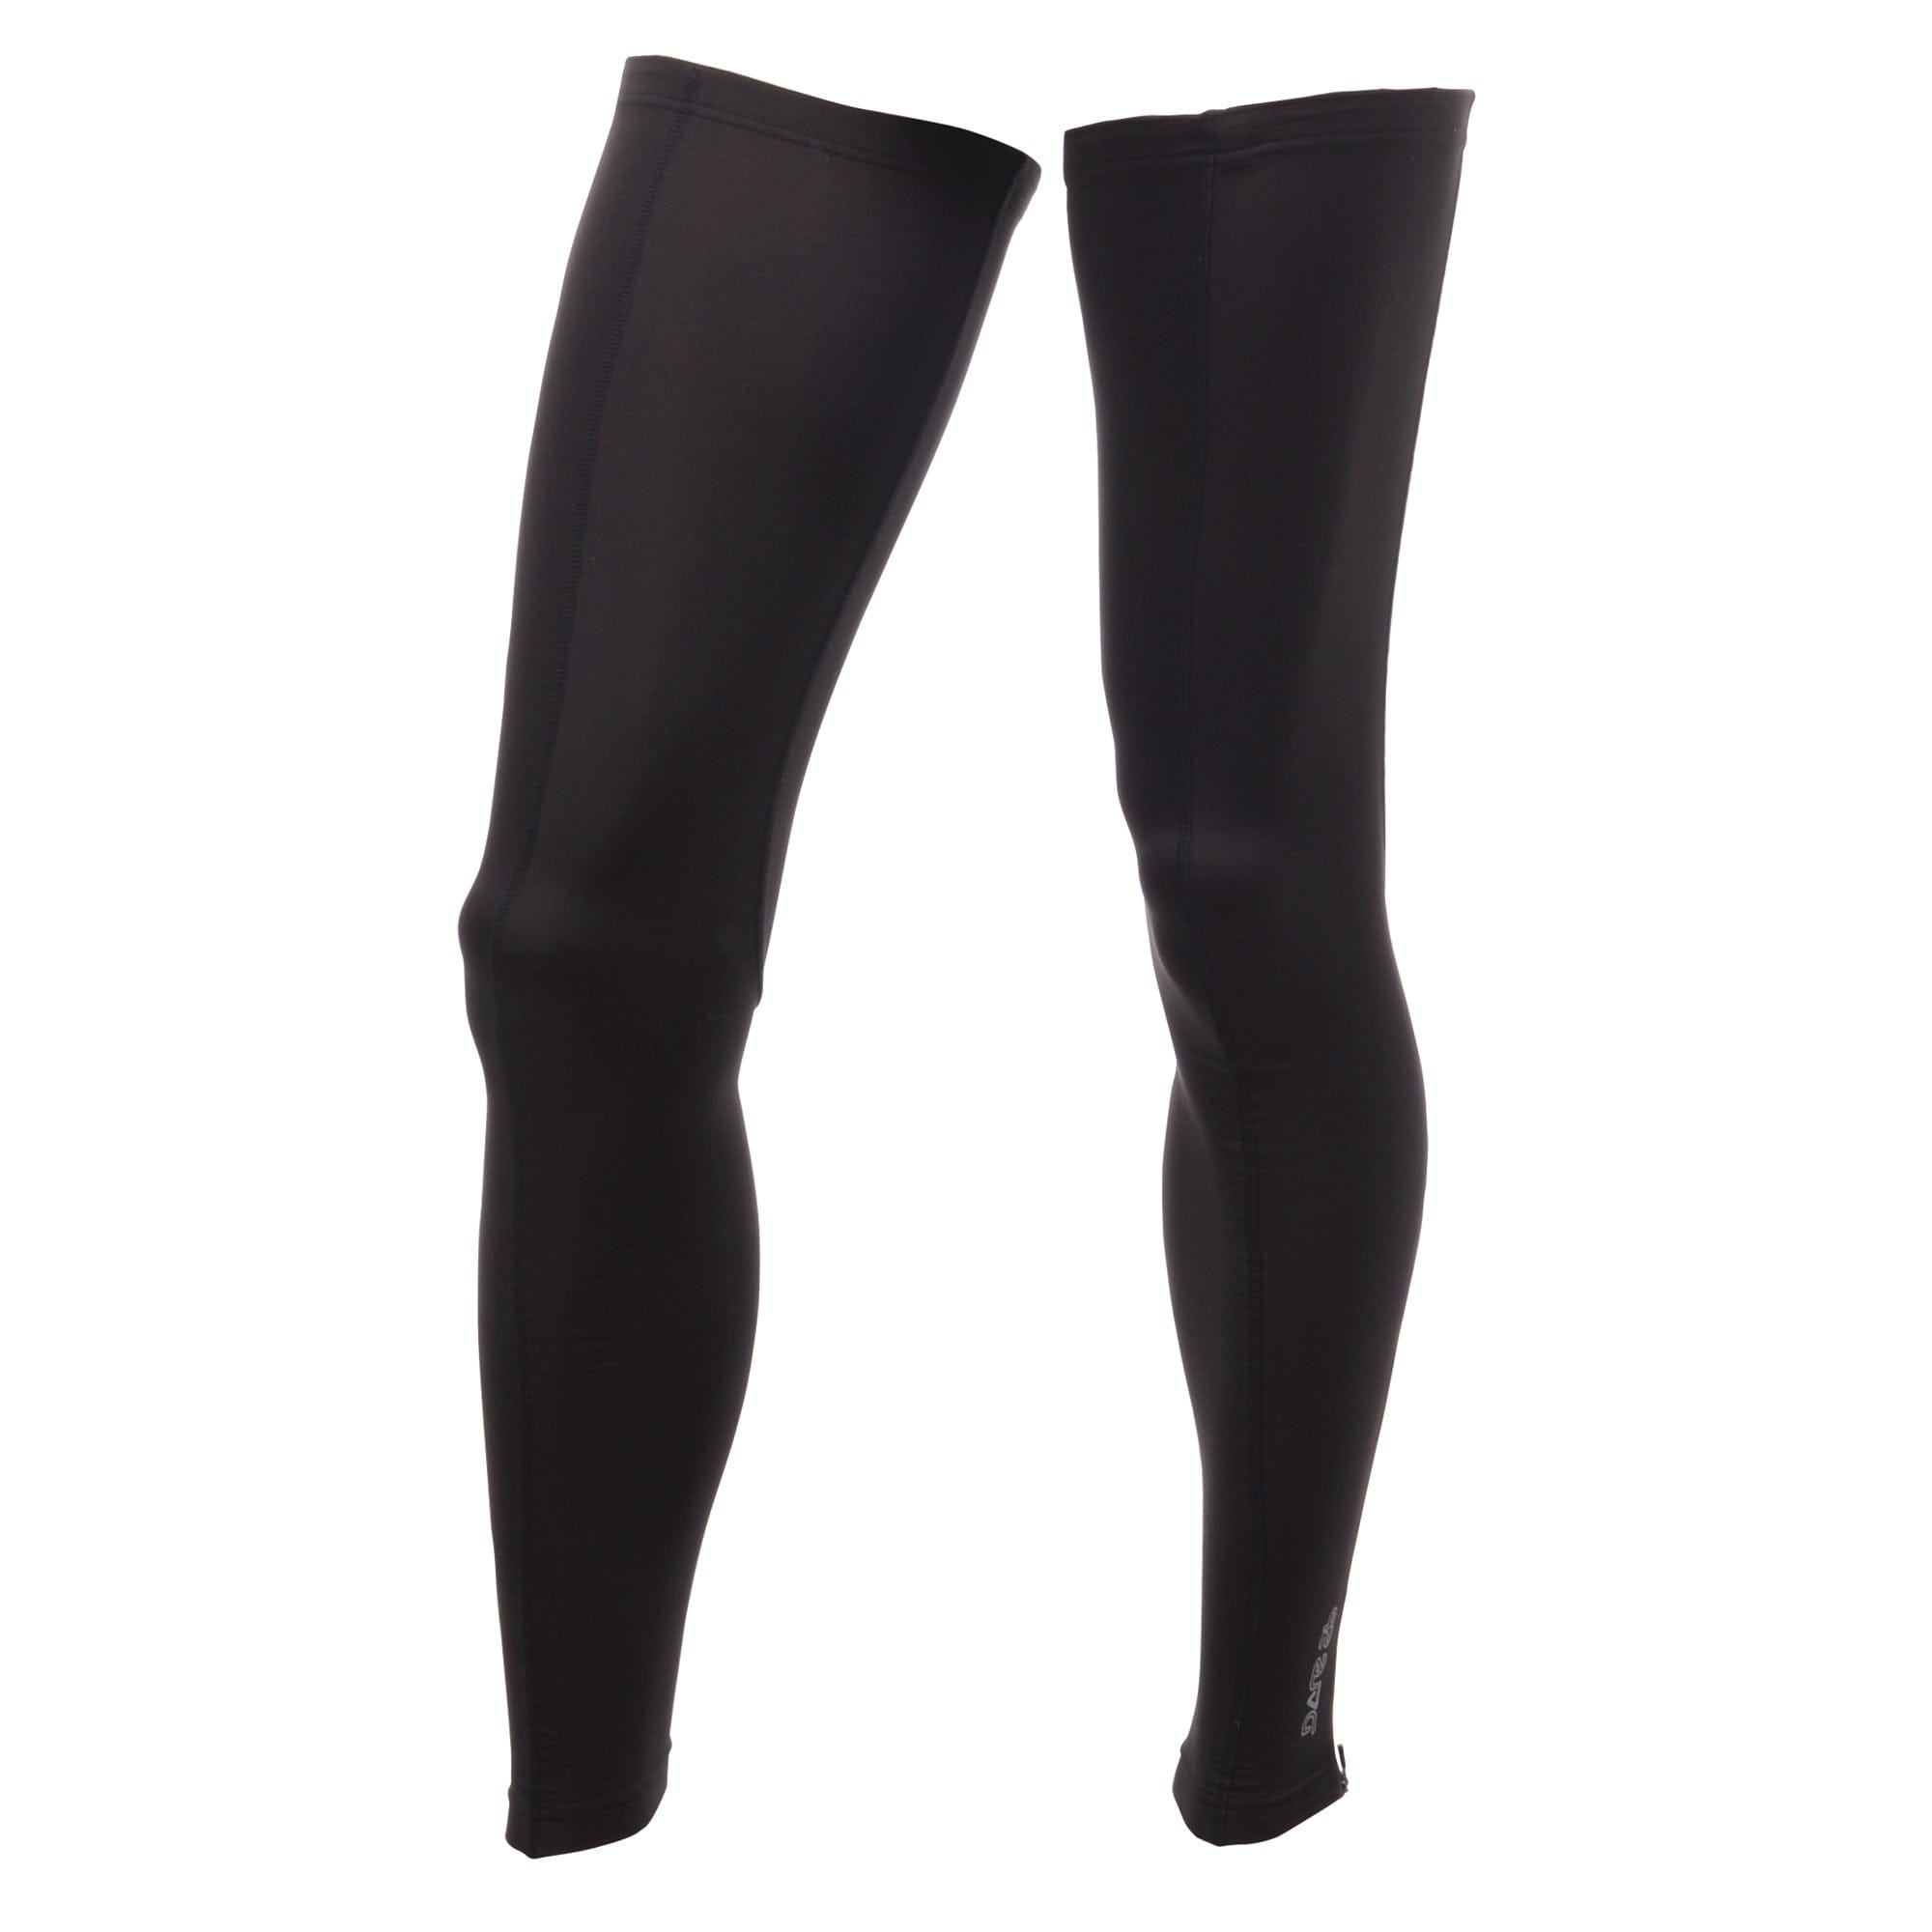 Cycle Tribe Product Sizes Dare 2b Leg Warmers